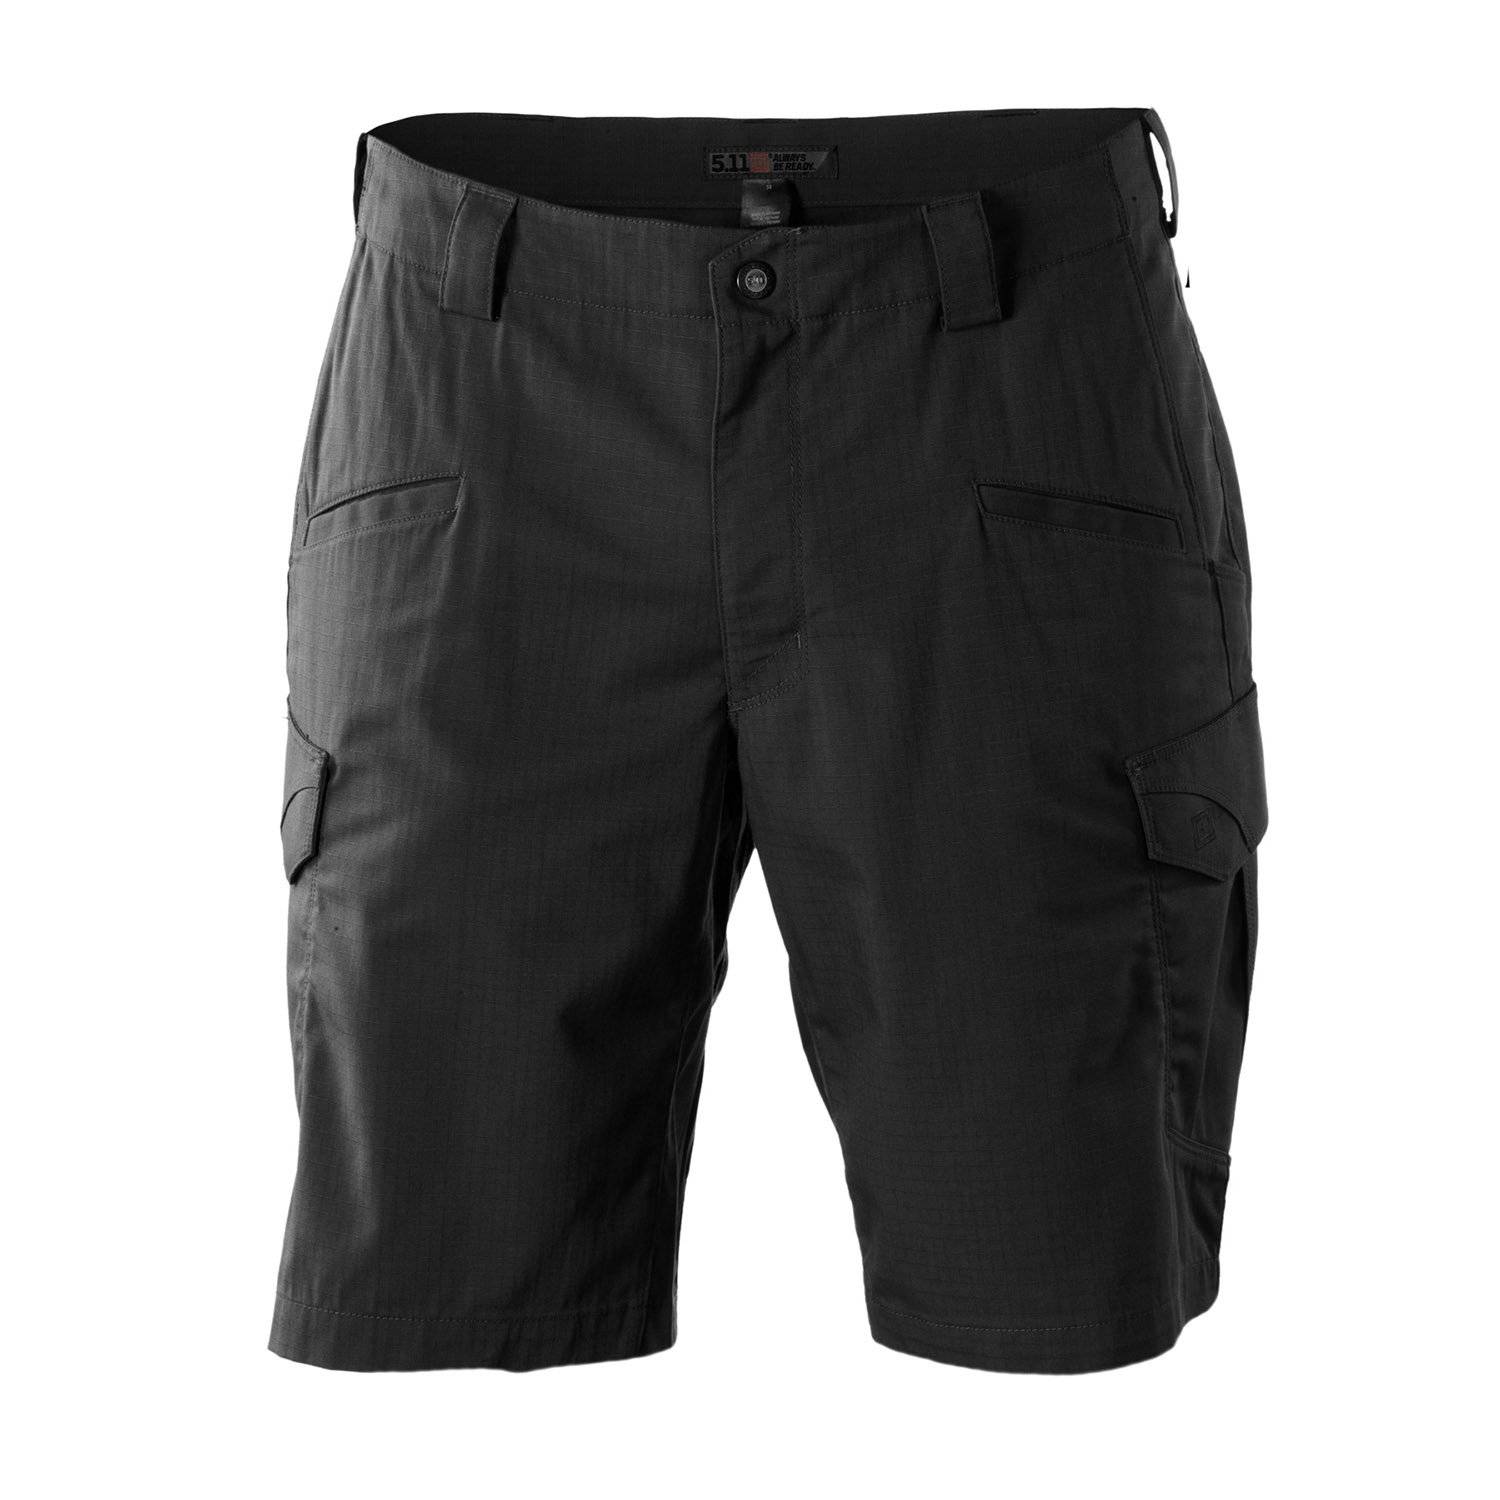 5.11 tactical shorts 11 inch